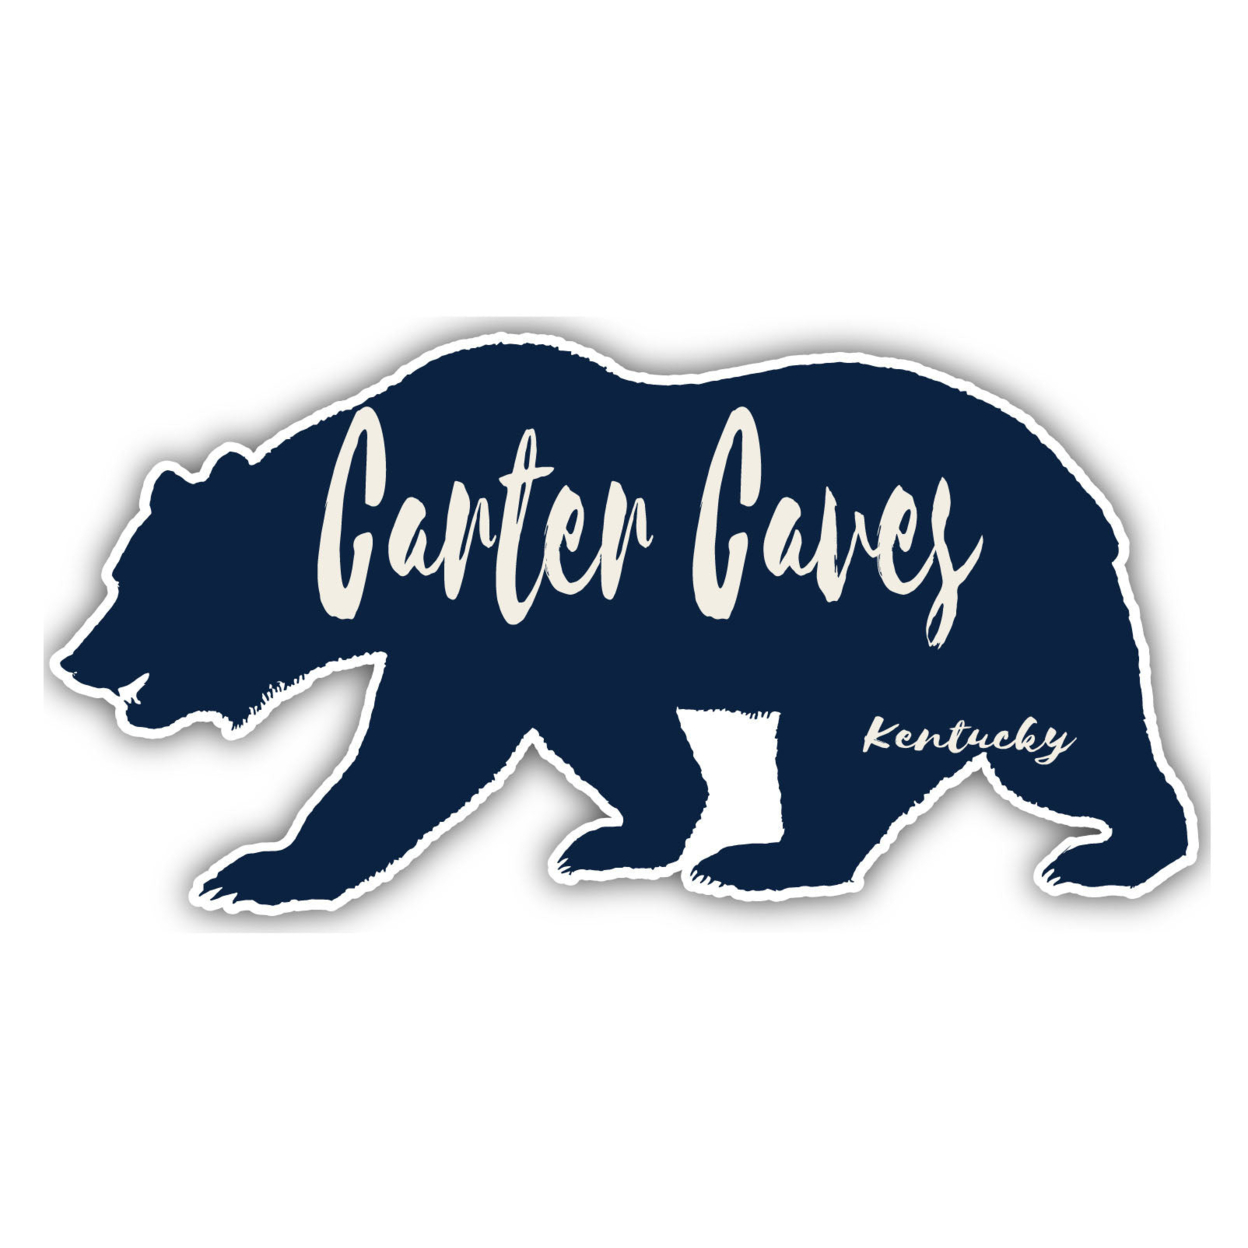 Carter Caves Kentucky Souvenir Decorative Stickers (Choose Theme And Size) - 4-Pack, 4-Inch, Bear